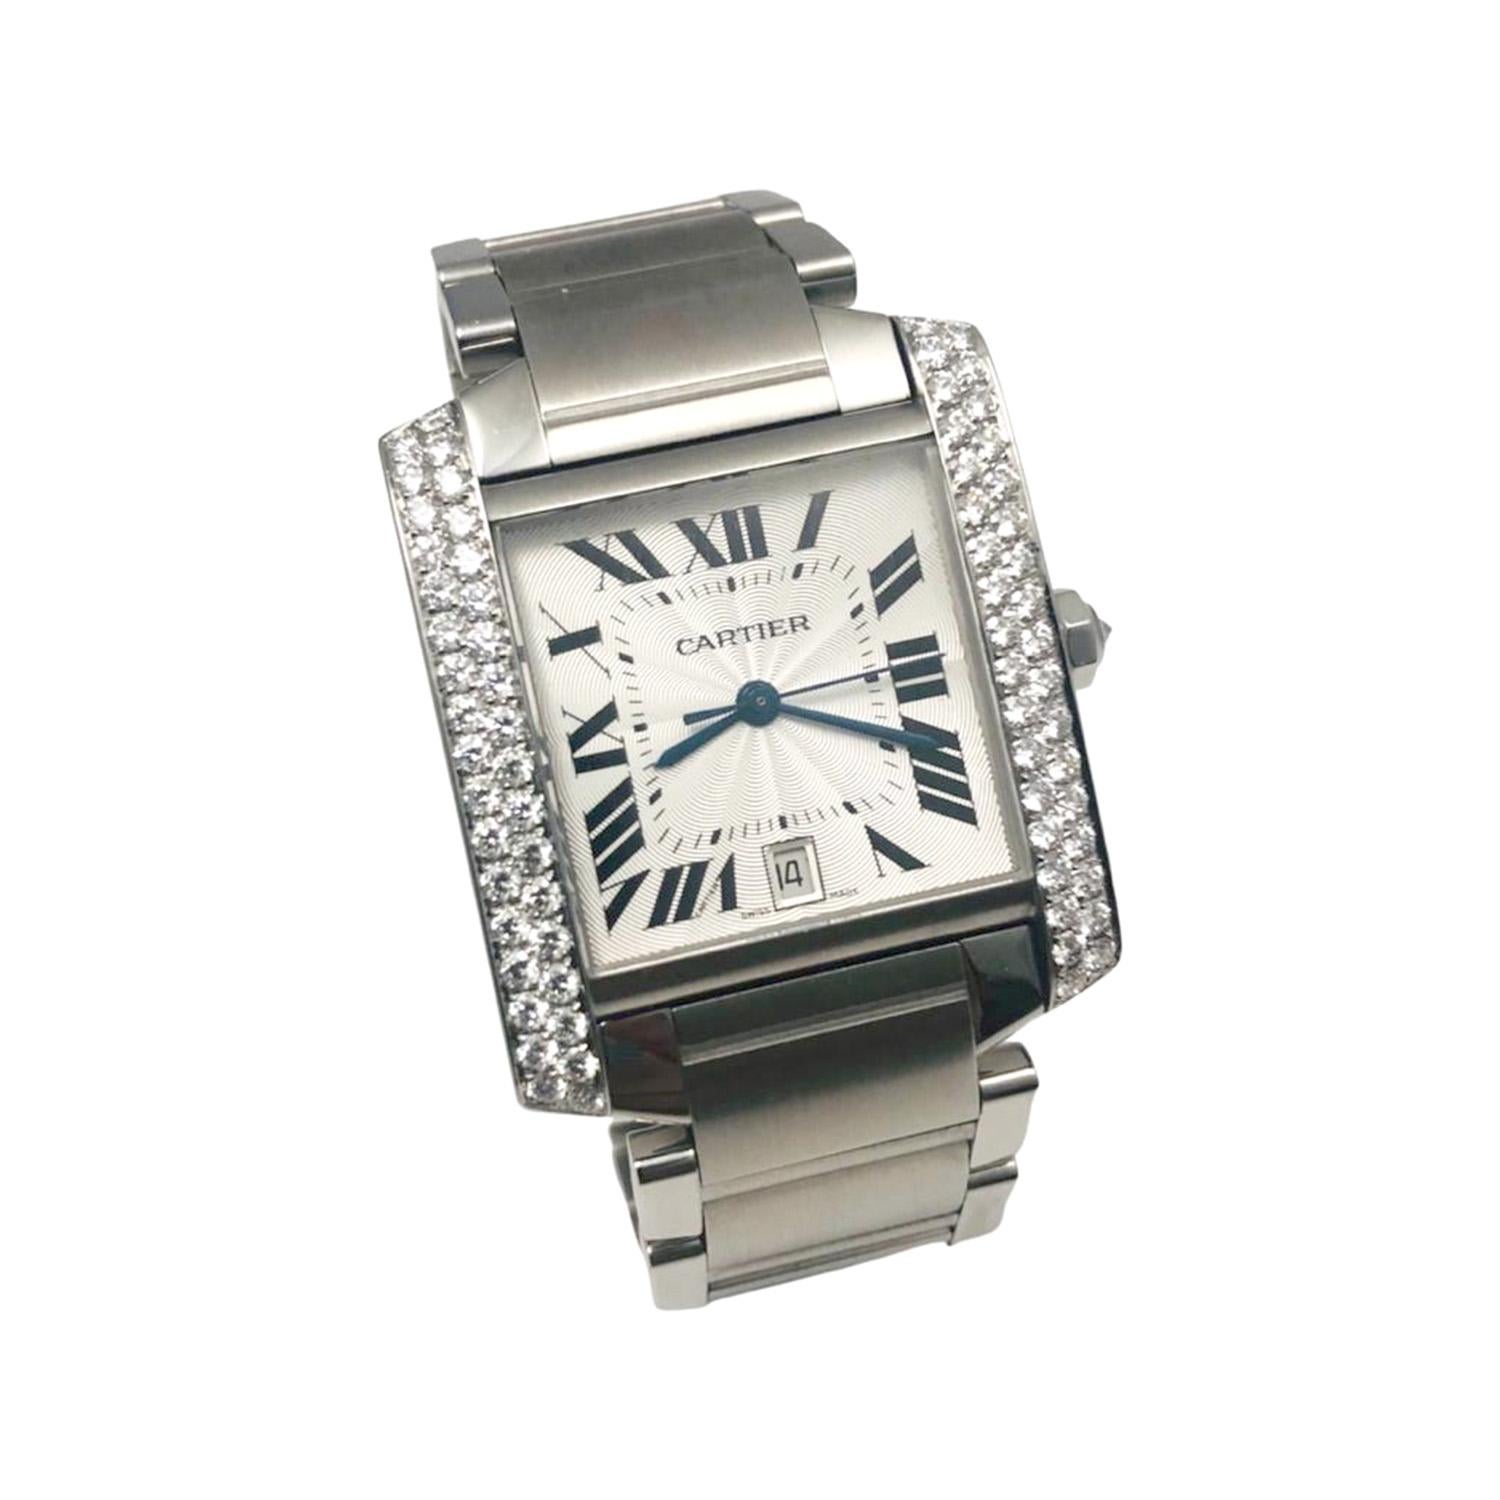 Brand: Cartier

Model: Panthere 

Movement: Automatic 

Case Size: 28 x 33 mm 

Dial: Roman Numeral Hour Markers

Bezel: Stainless Steel/Custom Diamonds

Case Material: Stainless Steel

Band Material: Stainless Steel

Crystal: Scratch-Resistant